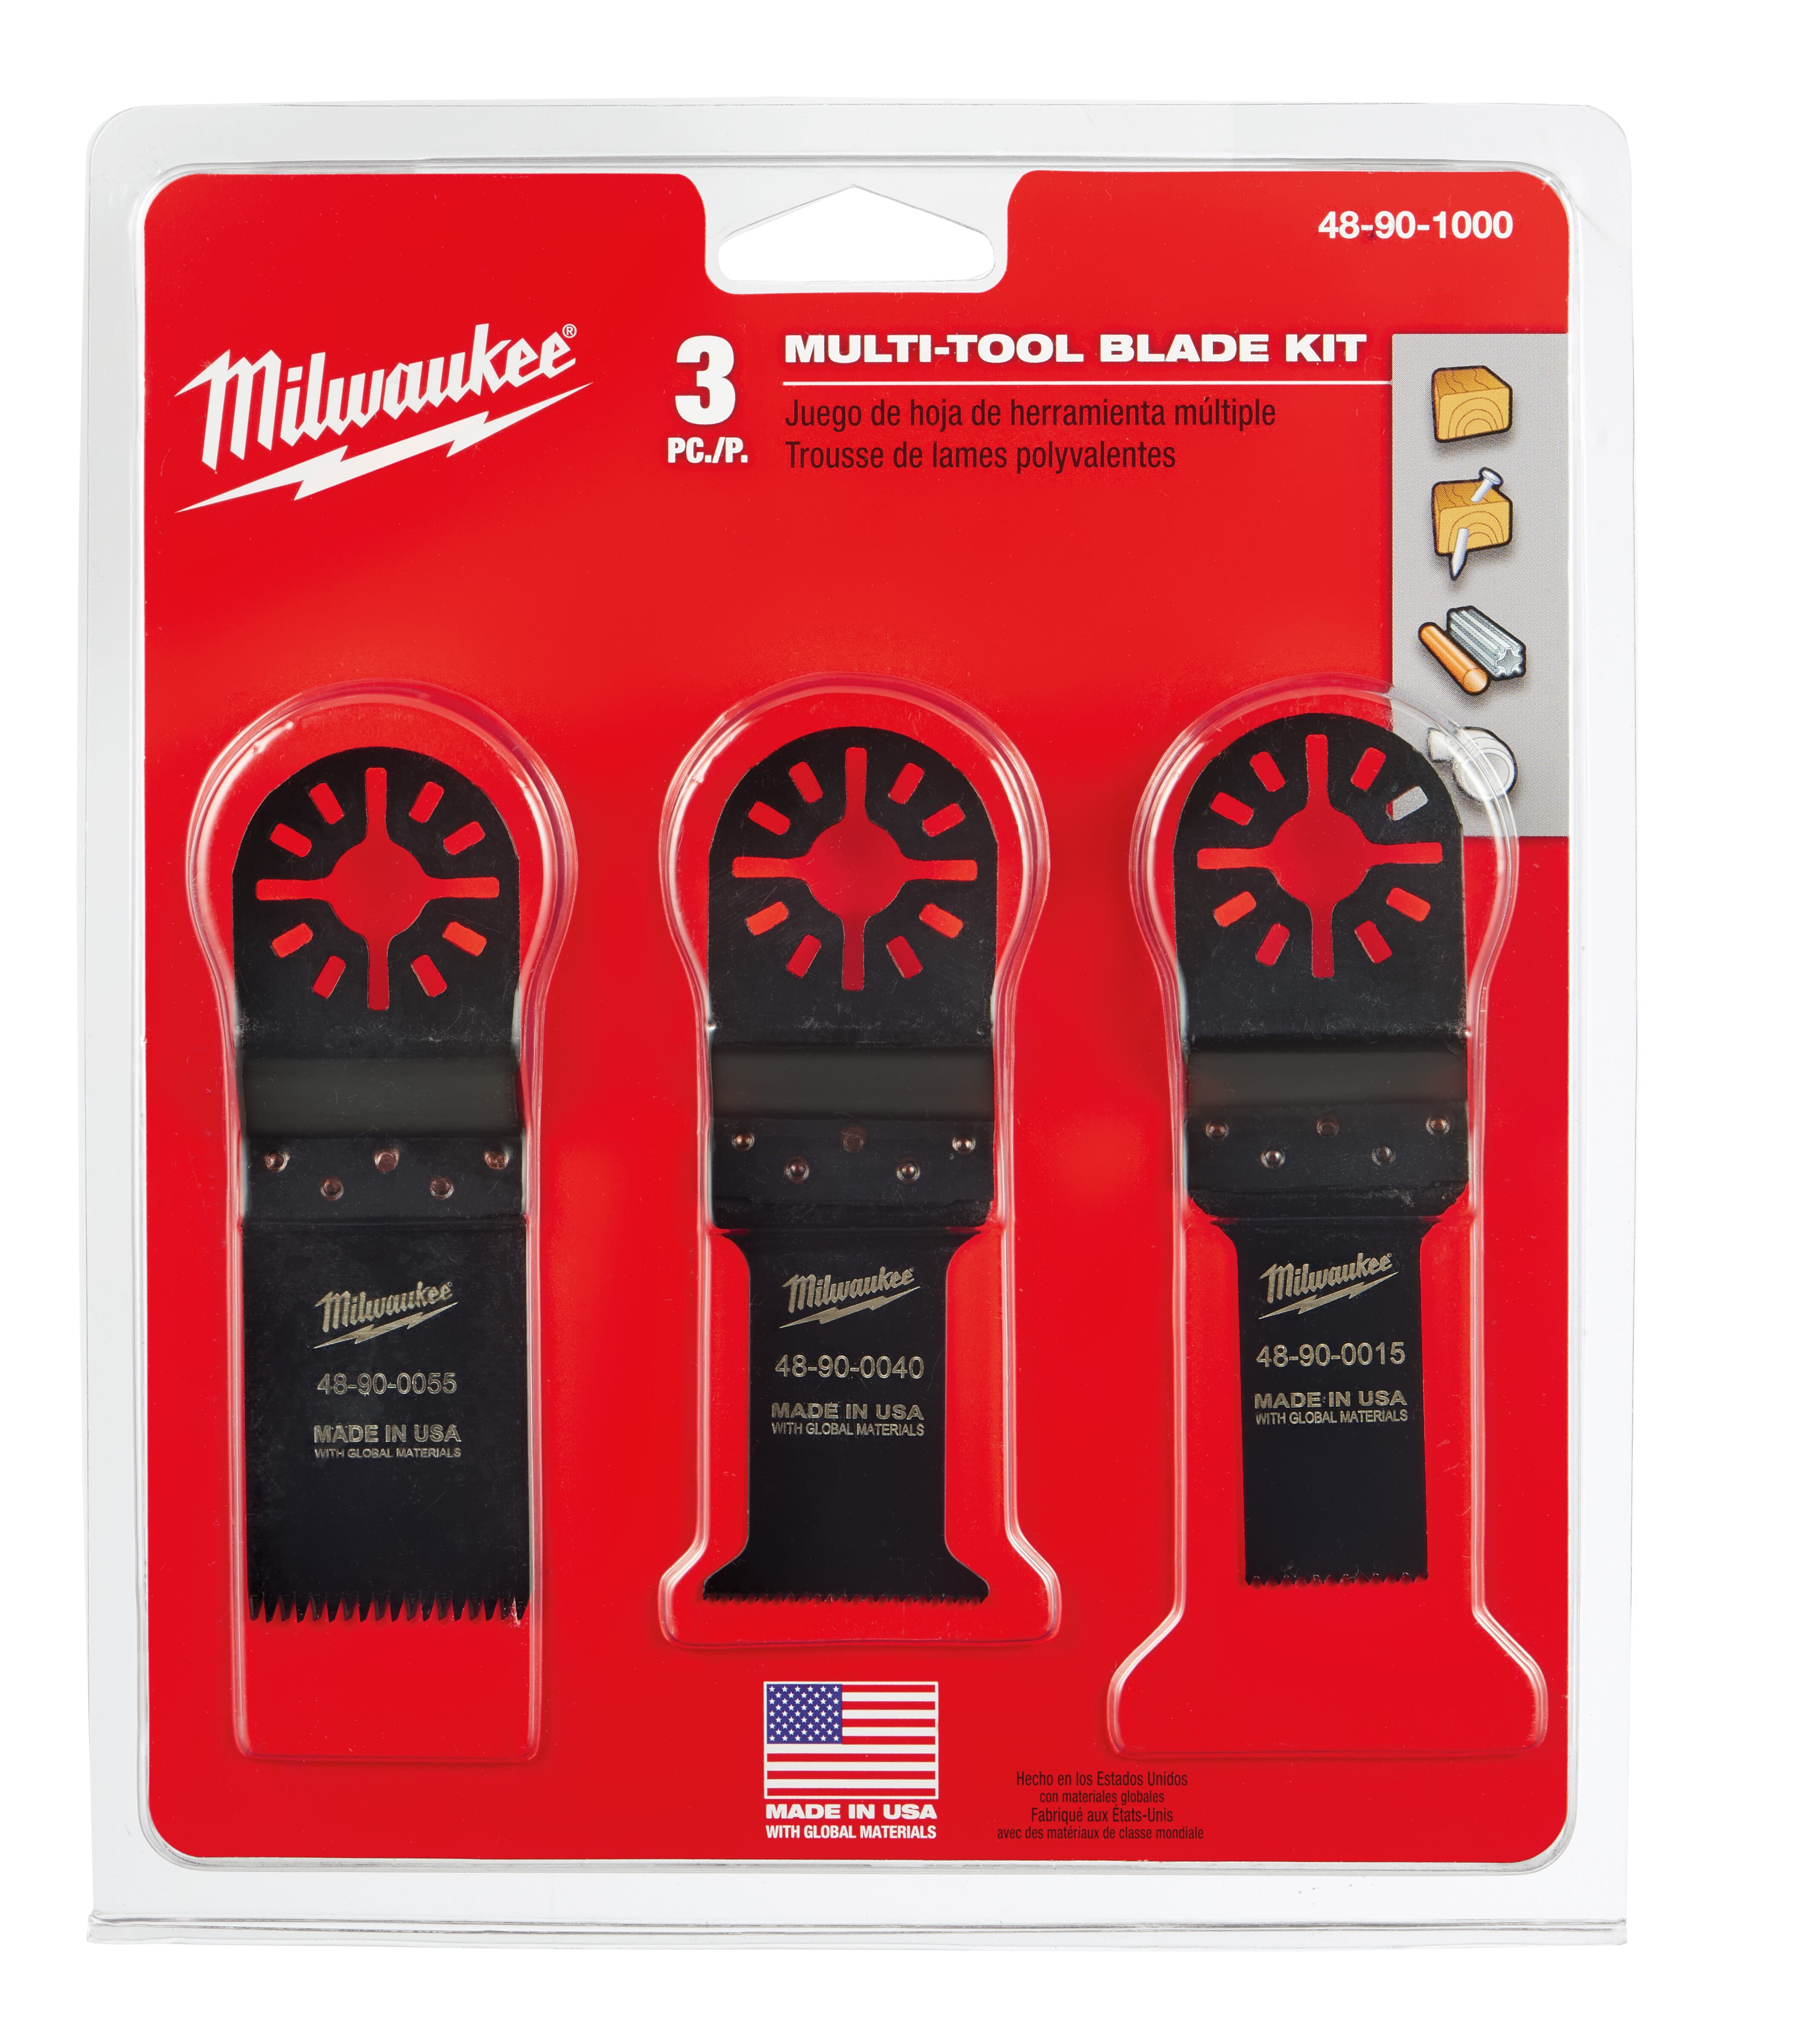 Milwaukee® 48-90-1000 Multi-Tool Blade Kit, For Use With Professional Grade Multi-Oscillating Tool, 3-Piece, 3/4 and 1-1/4 in Size, Bi-Metal/High Carbon Steel